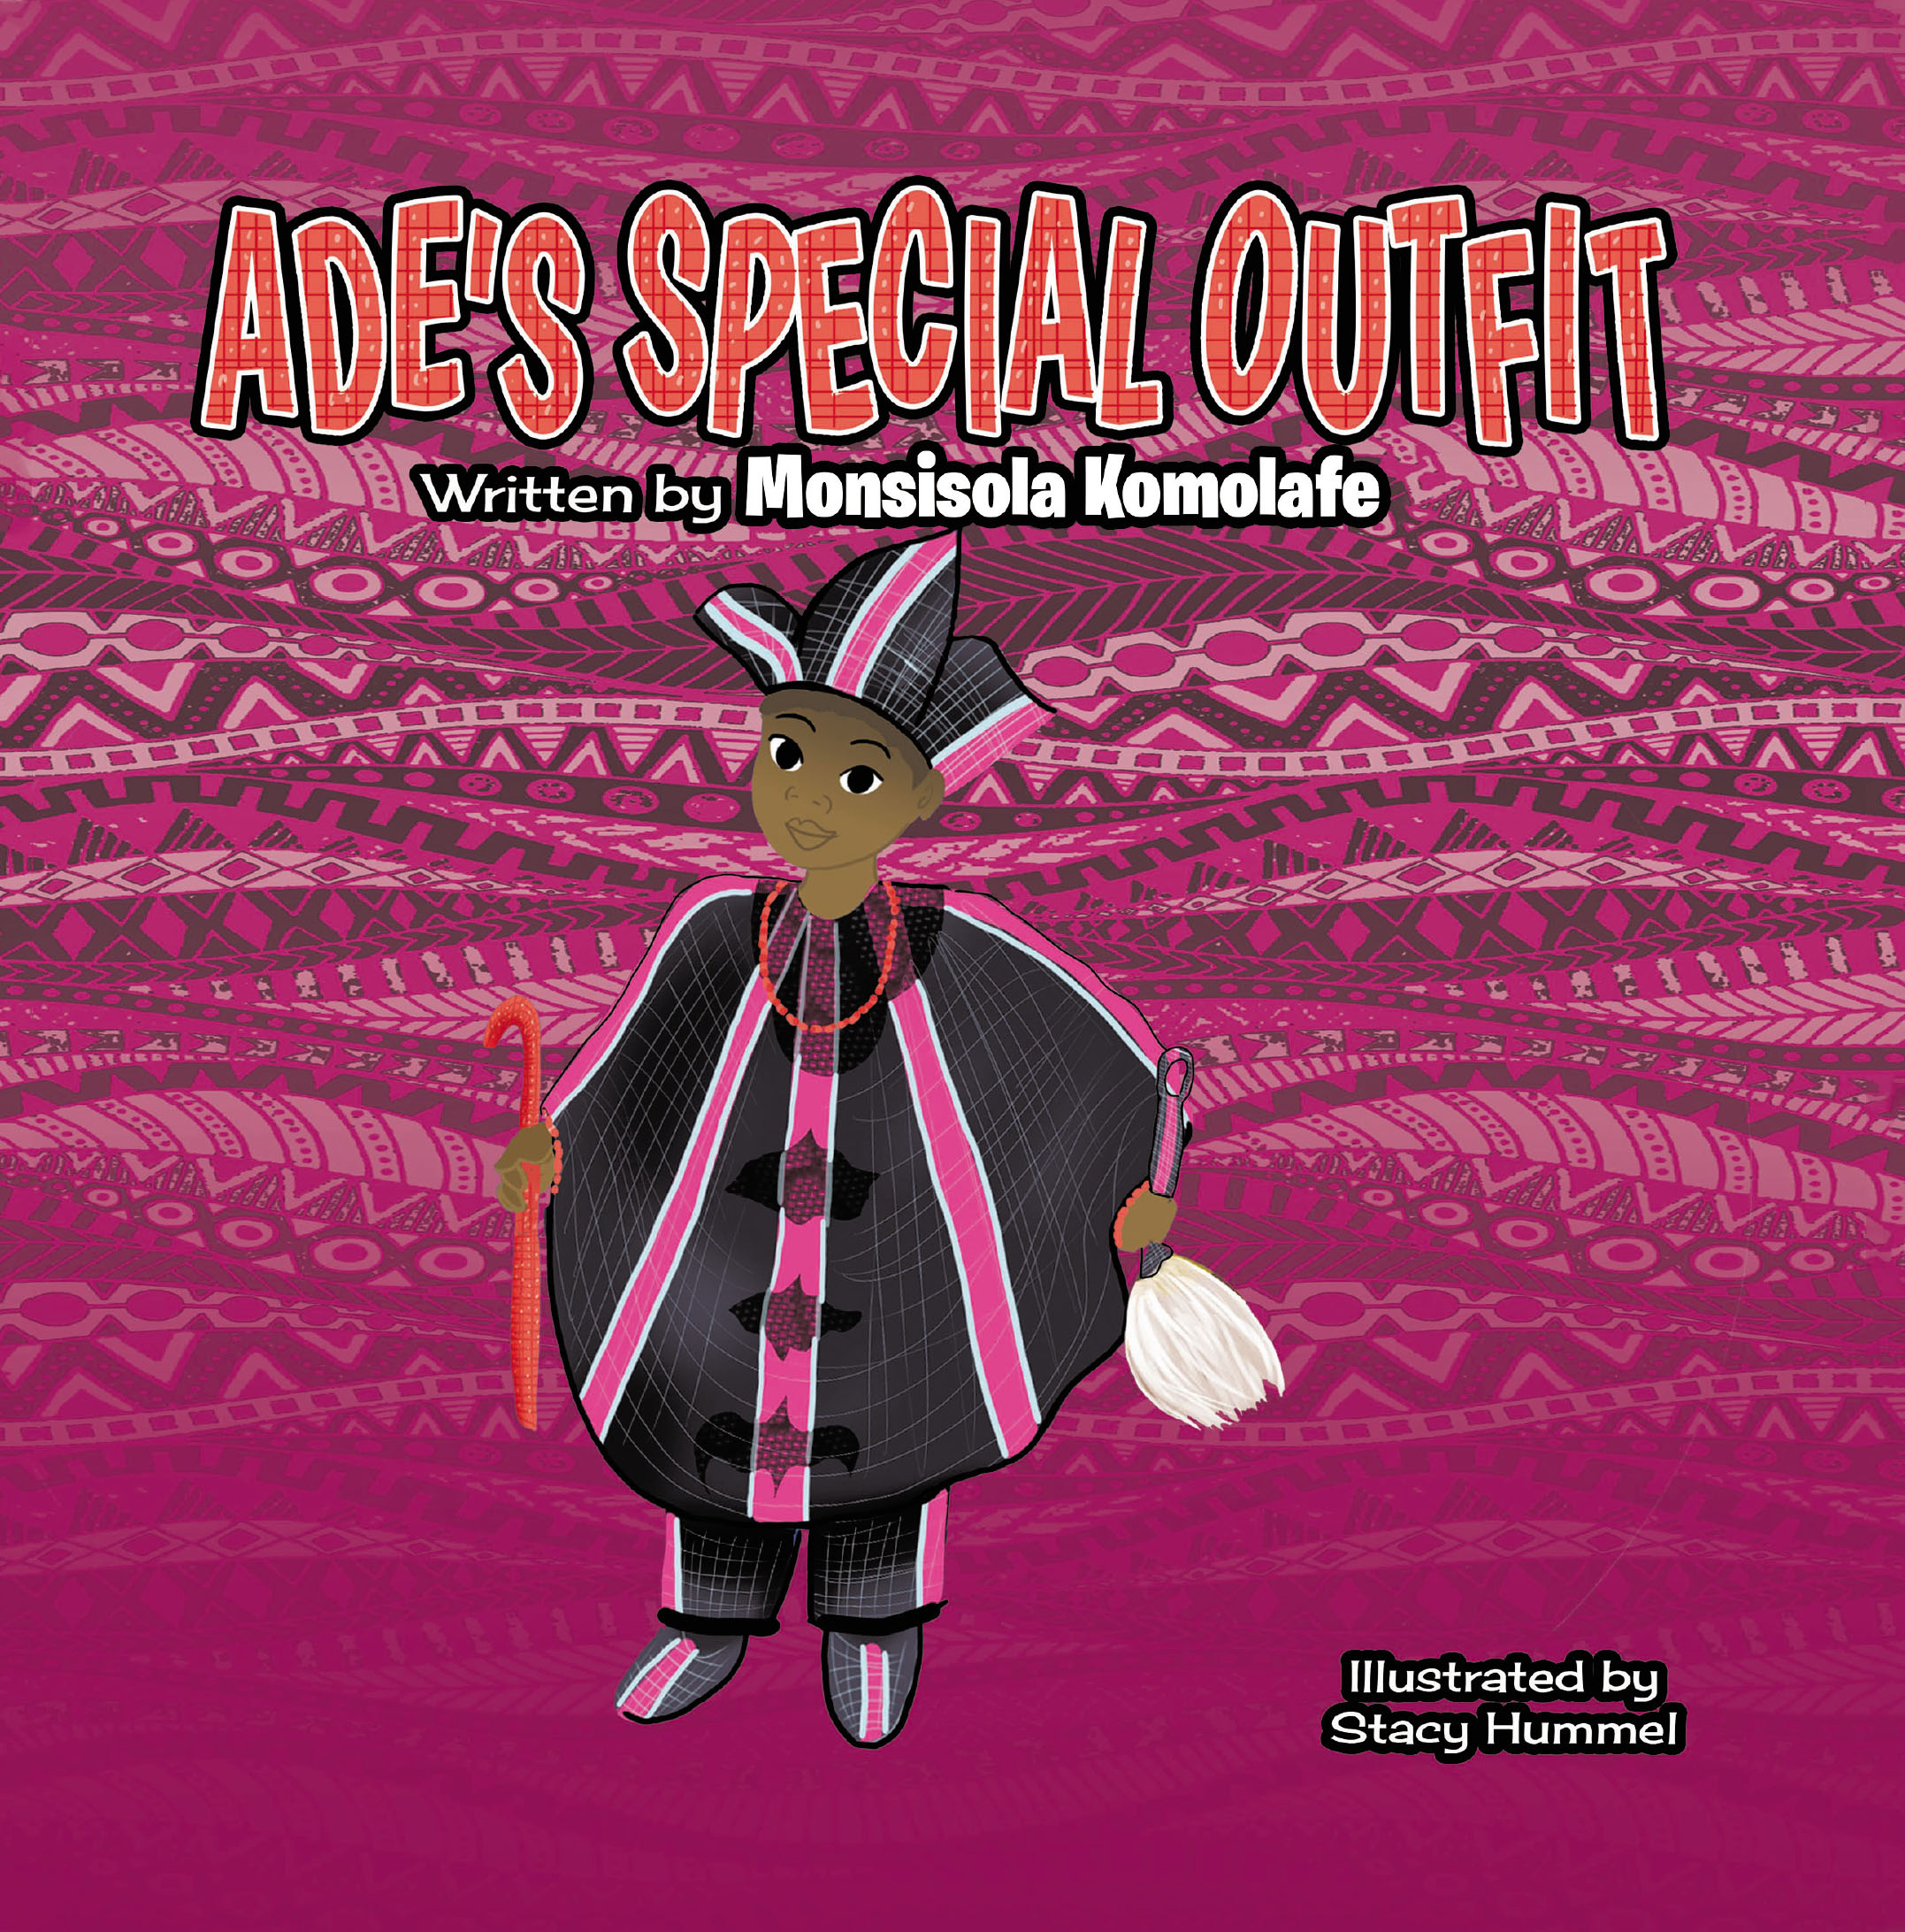 Dr. Monisola Komolafe’s New Book, "Ade’s Special Outfit," Centers Around a Young Boy Who is Gifted African Clothing by His Grandmother as a Present for His Birthday